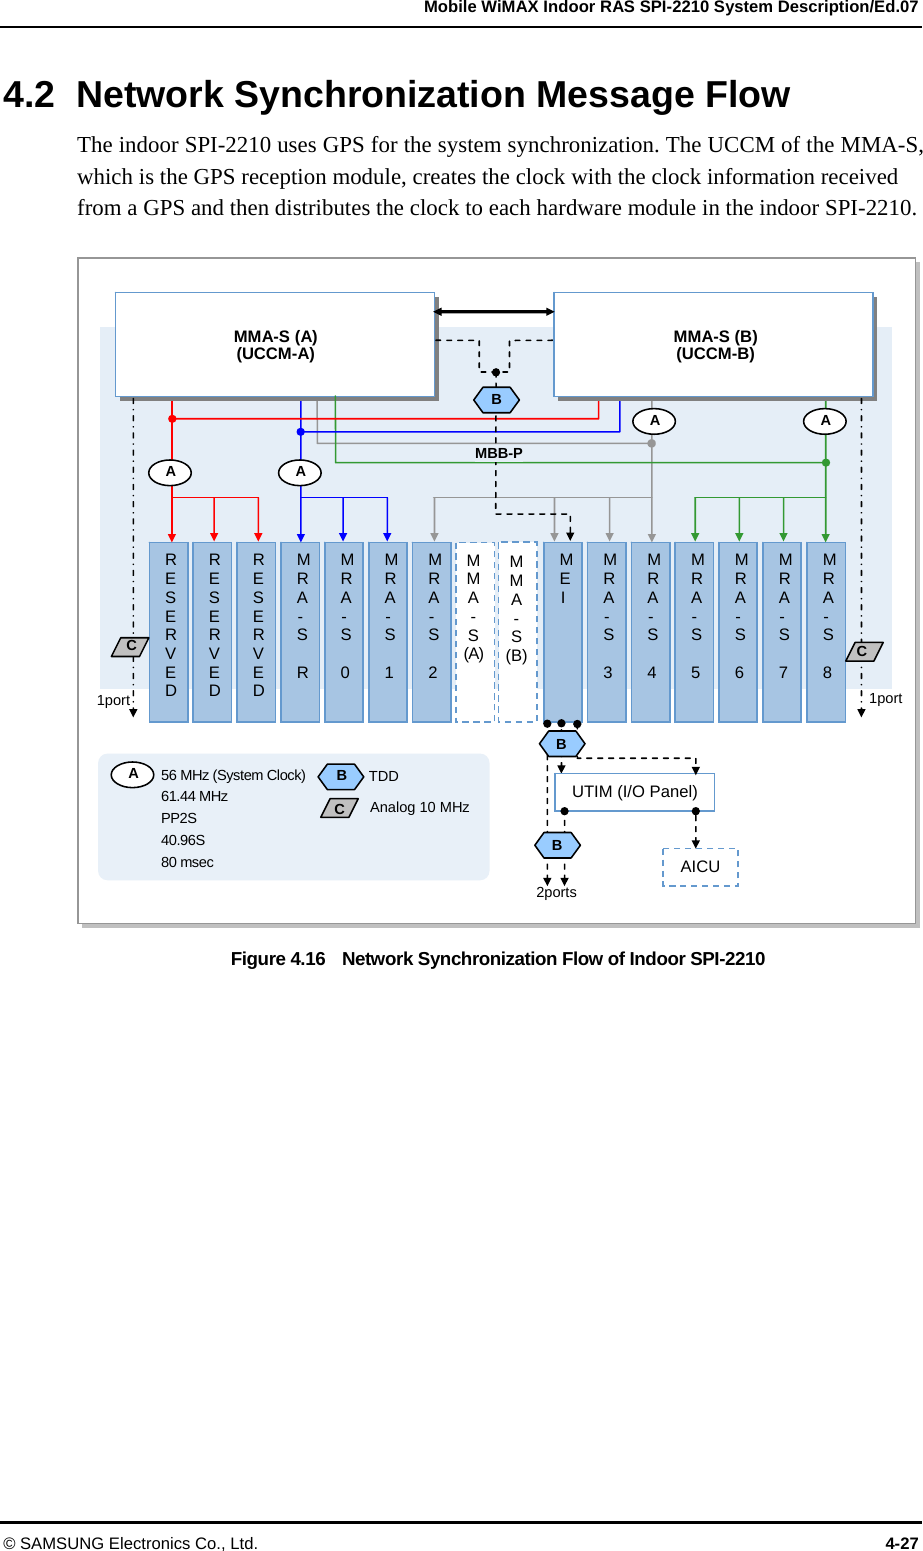   Mobile WiMAX Indoor RAS SPI-2210 System Description/Ed.07 © SAMSUNG Electronics Co., Ltd.  4-27 4.2  Network Synchronization Message Flow The indoor SPI-2210 uses GPS for the system synchronization. The UCCM of the MMA-S, which is the GPS reception module, creates the clock with the clock information received from a GPS and then distributes the clock to each hardware module in the indoor SPI-2210.  Figure 4.16    Network Synchronization Flow of Indoor SPI-2210  RESERVED MRA- S  8  RESERVED RESERVED MRA- S  R MRA-S 0MRA-S 1MRA-S 2 MEIMRA-S 3MRA-S 4MRA-S  5 MRA- S  6 MRA- S  7 MMA-S (A) (UCCM-A) MMA-S (B) (UCCM-B) MBB-PB2ports A 56 MHz (System Clock) 61.44 MHz PP2S 40.96S 80 msec BTDD A A AA  M M A - S (A) M M A - S (B)CAnalog 10 MHz 1port  1port UTIM (I/O Panel)AICU BBC  C